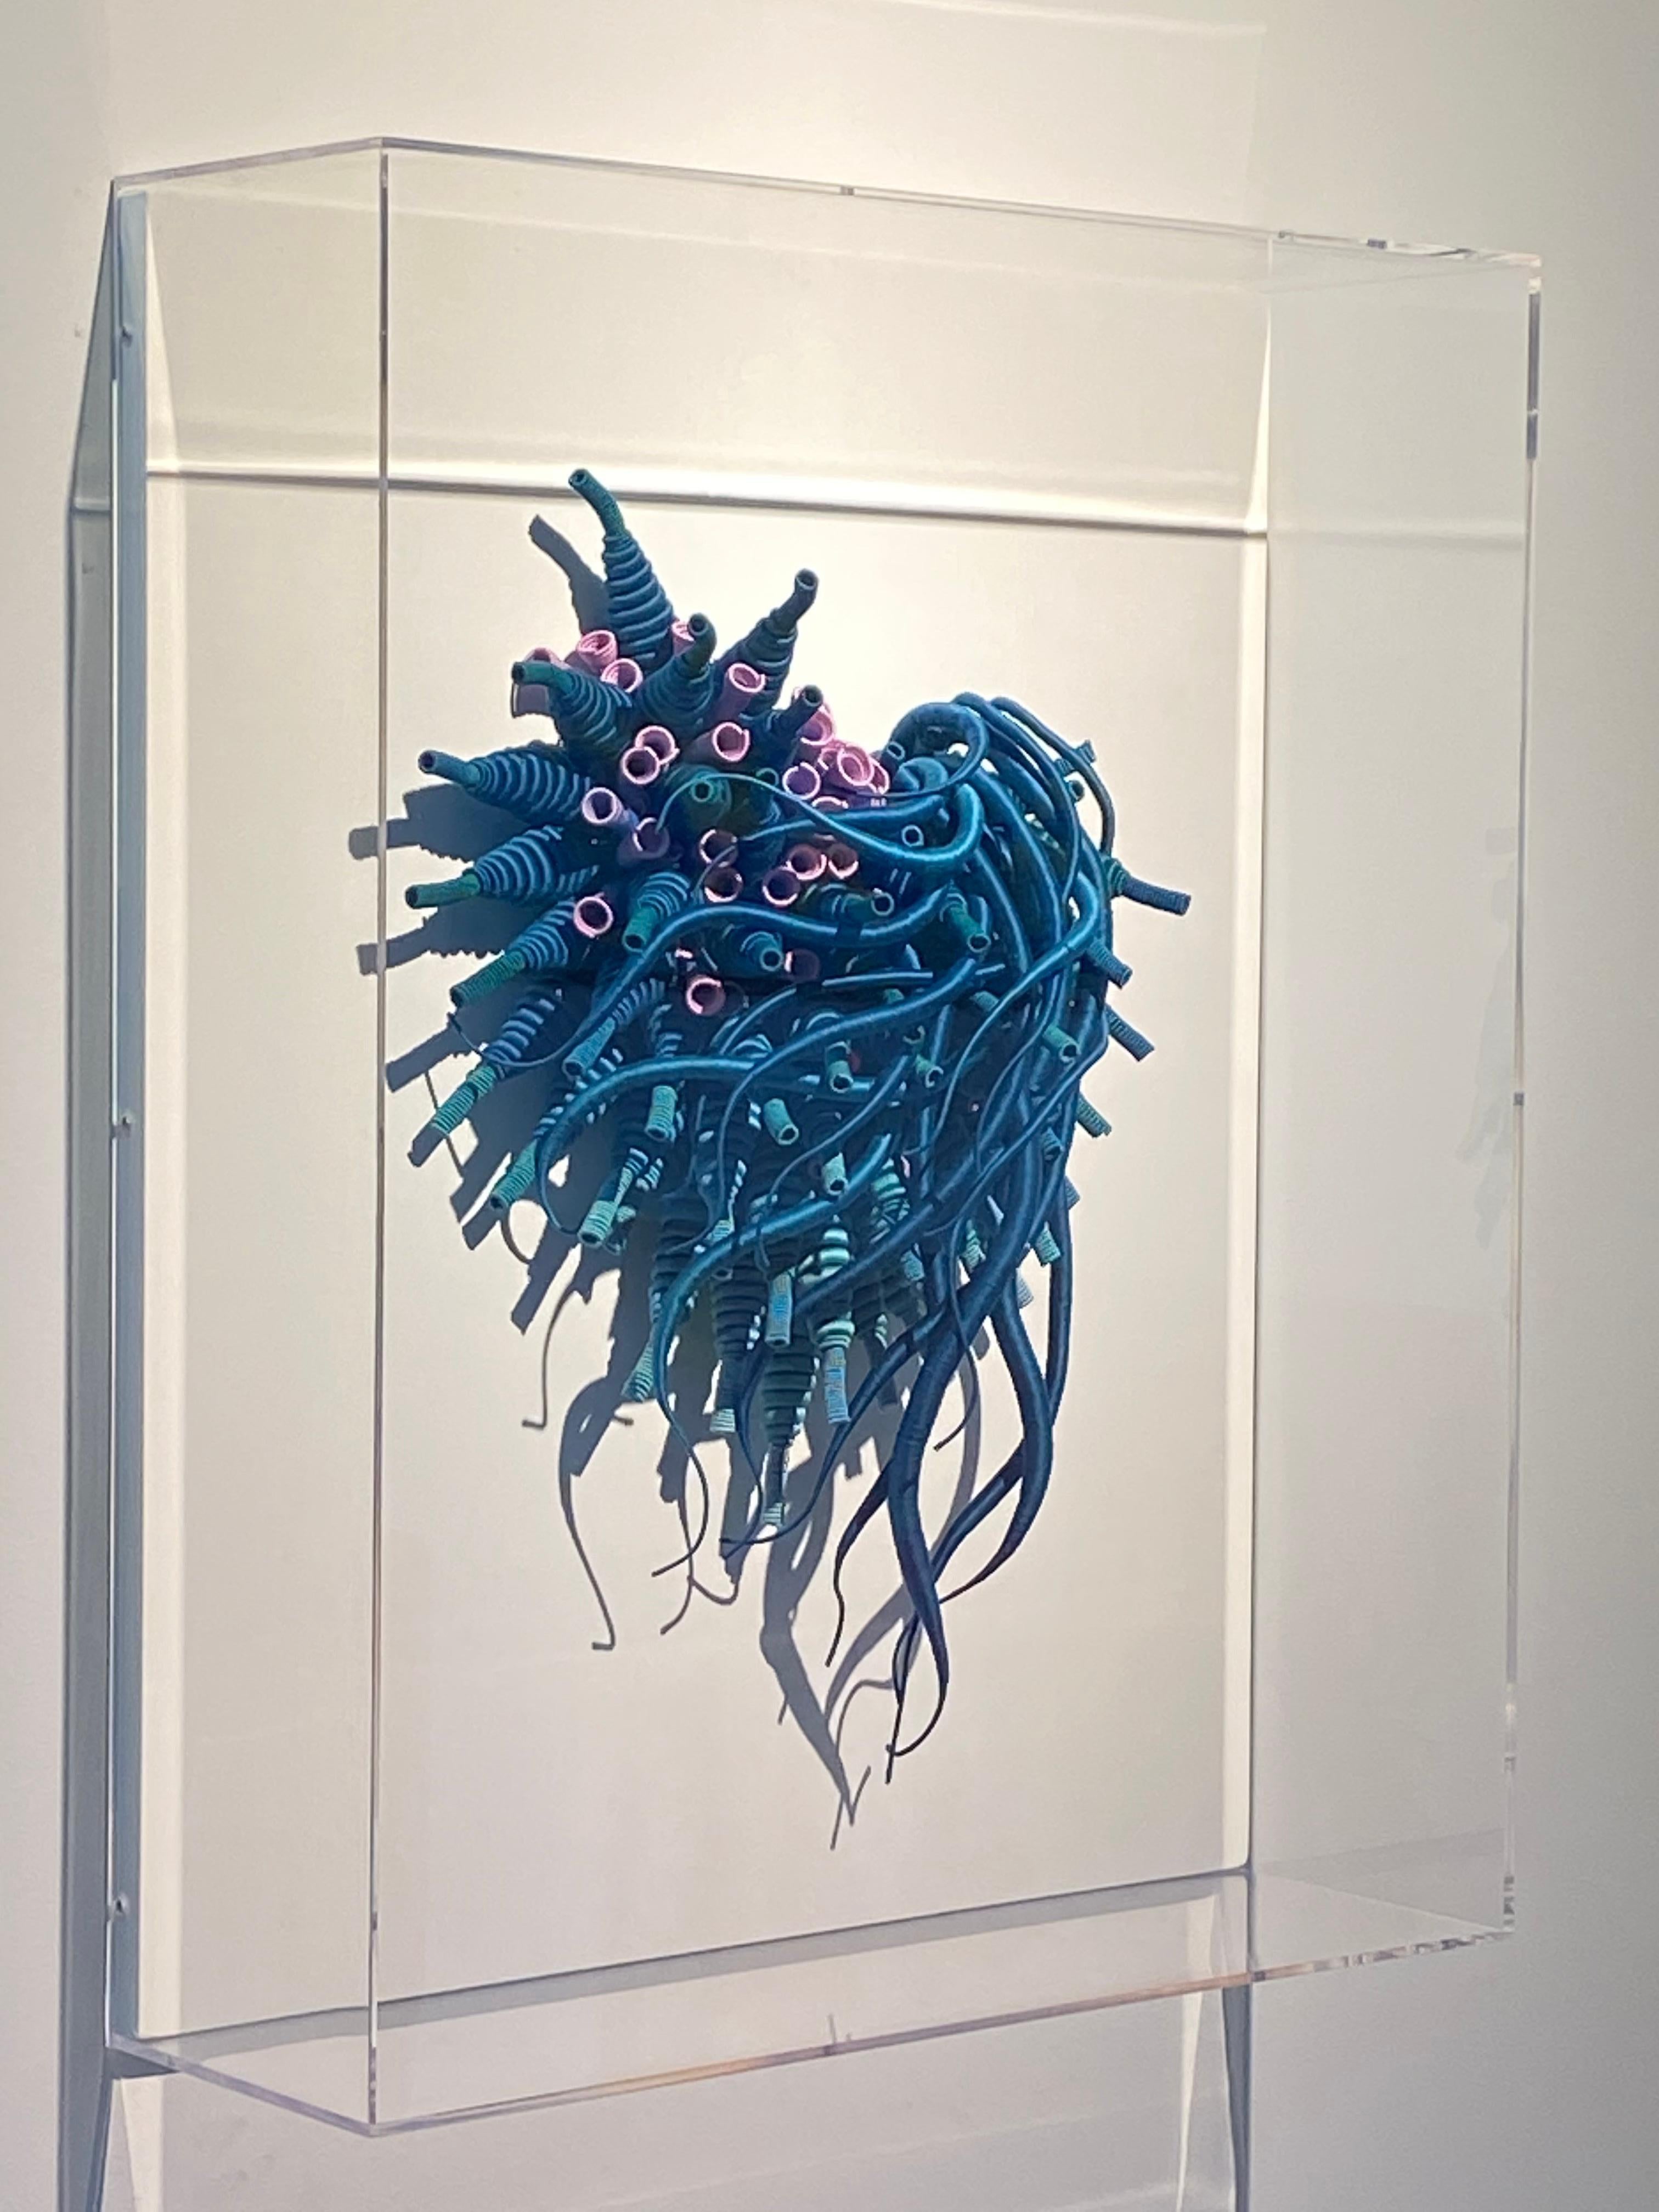 Framed in a clear acrylic shadowbox, Catherine Latson's Specimen 25 reads as an artistic rendition of a beautiful sea specimen. Rich, jewel-toned teal blue hand-dyed cotton thread is wrapped around tendrils that stretch from a delicate cluster of